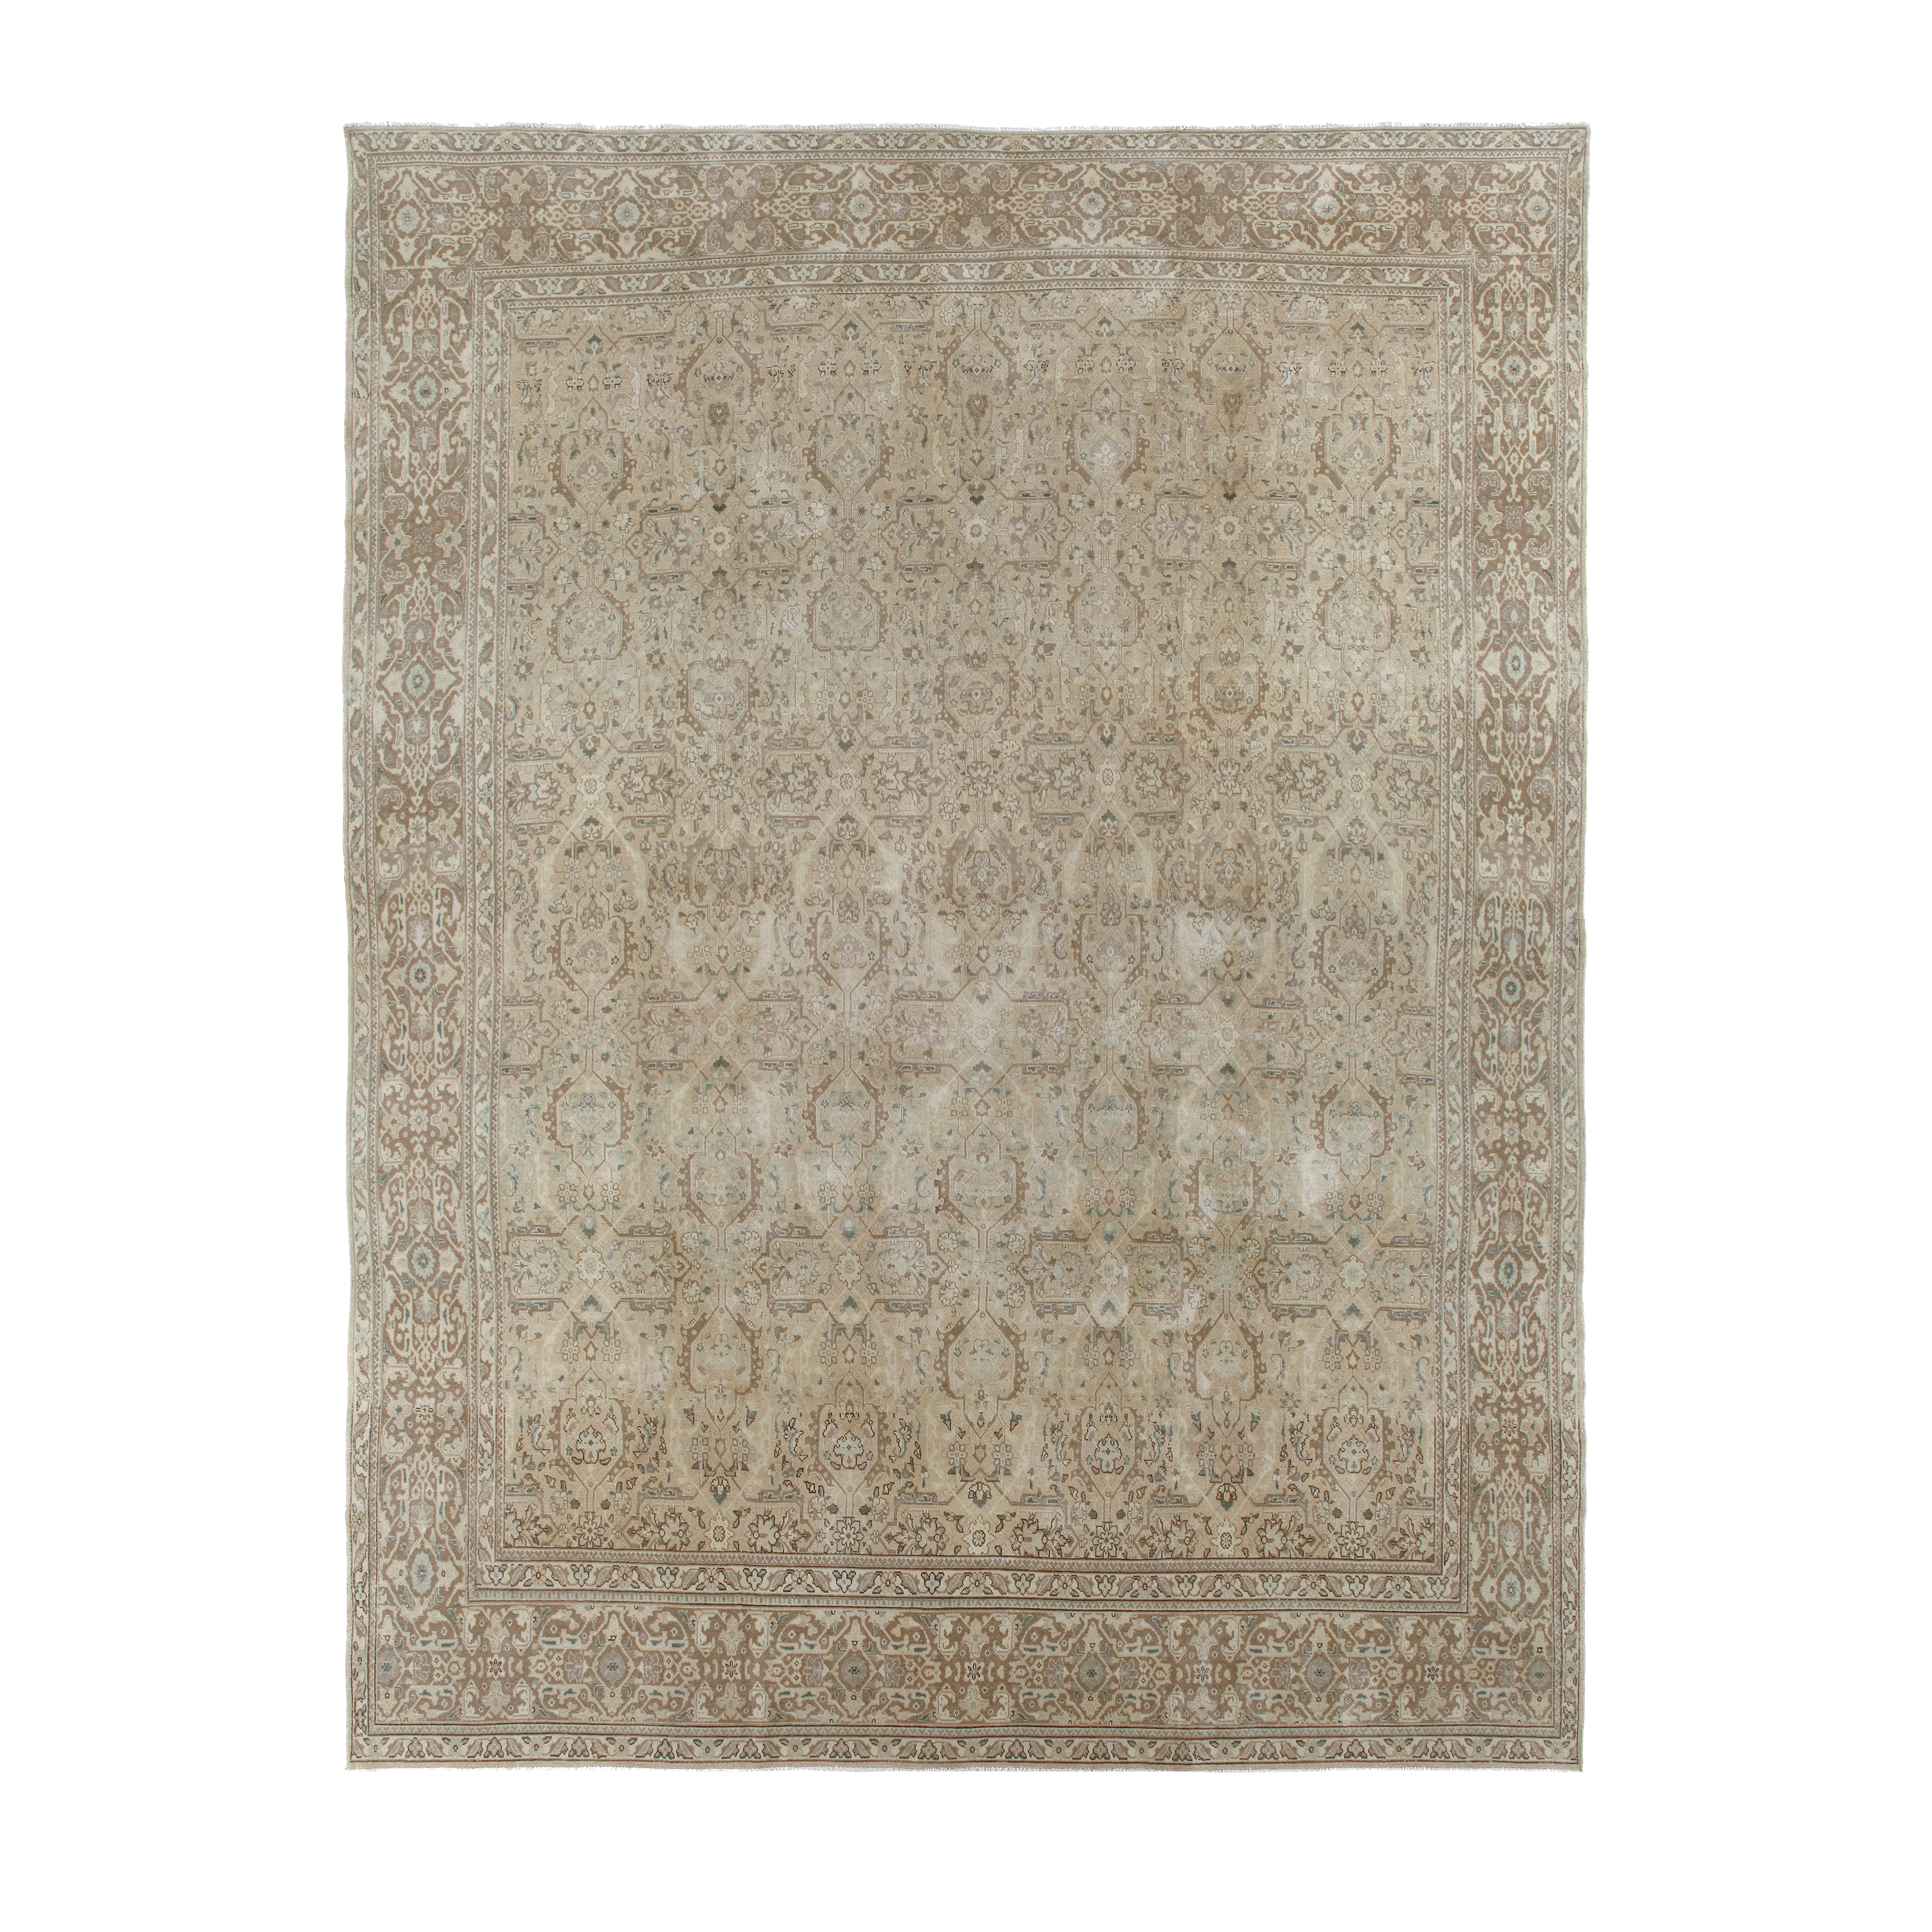 This Tabriz rug is made of fine handcard wool. 